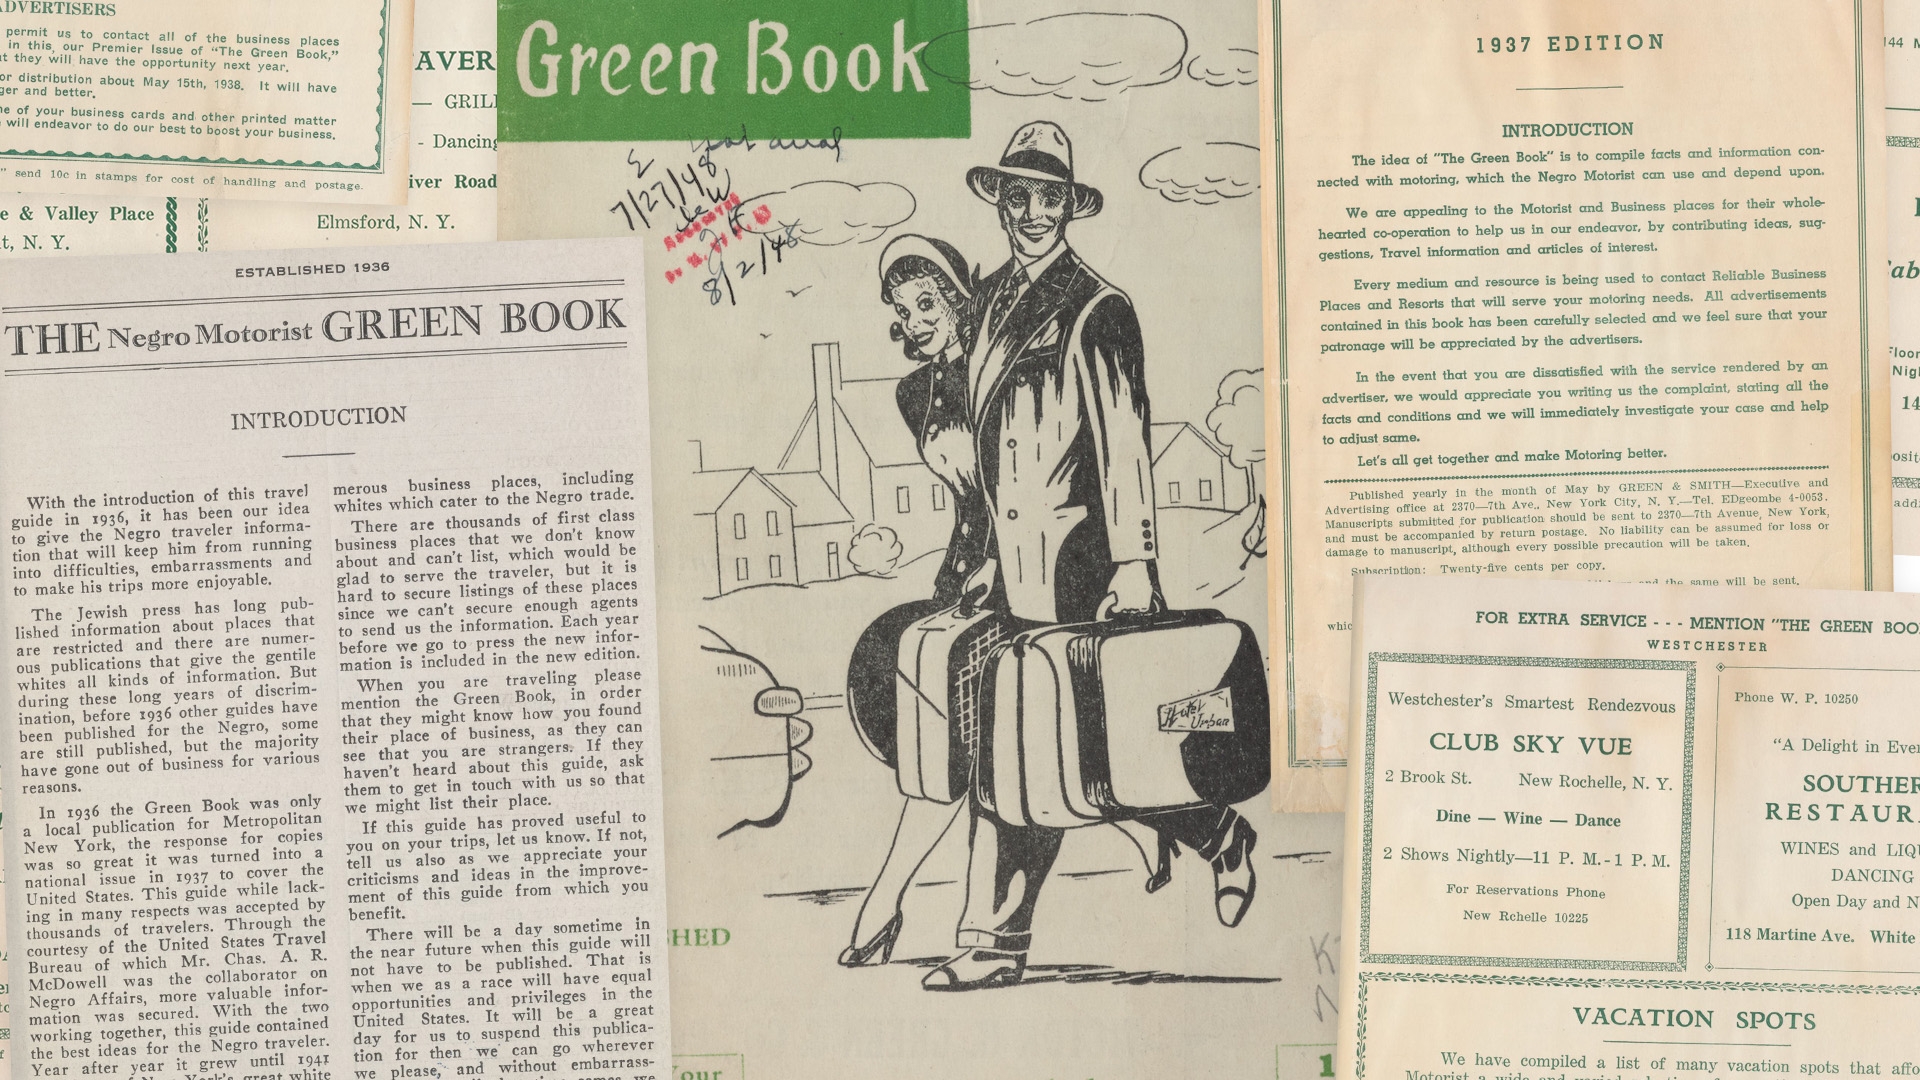 The Negro Motorist Green Book provided recommendations for African American travelers seeking lodging, dining, and other services while vacationing in the United States.